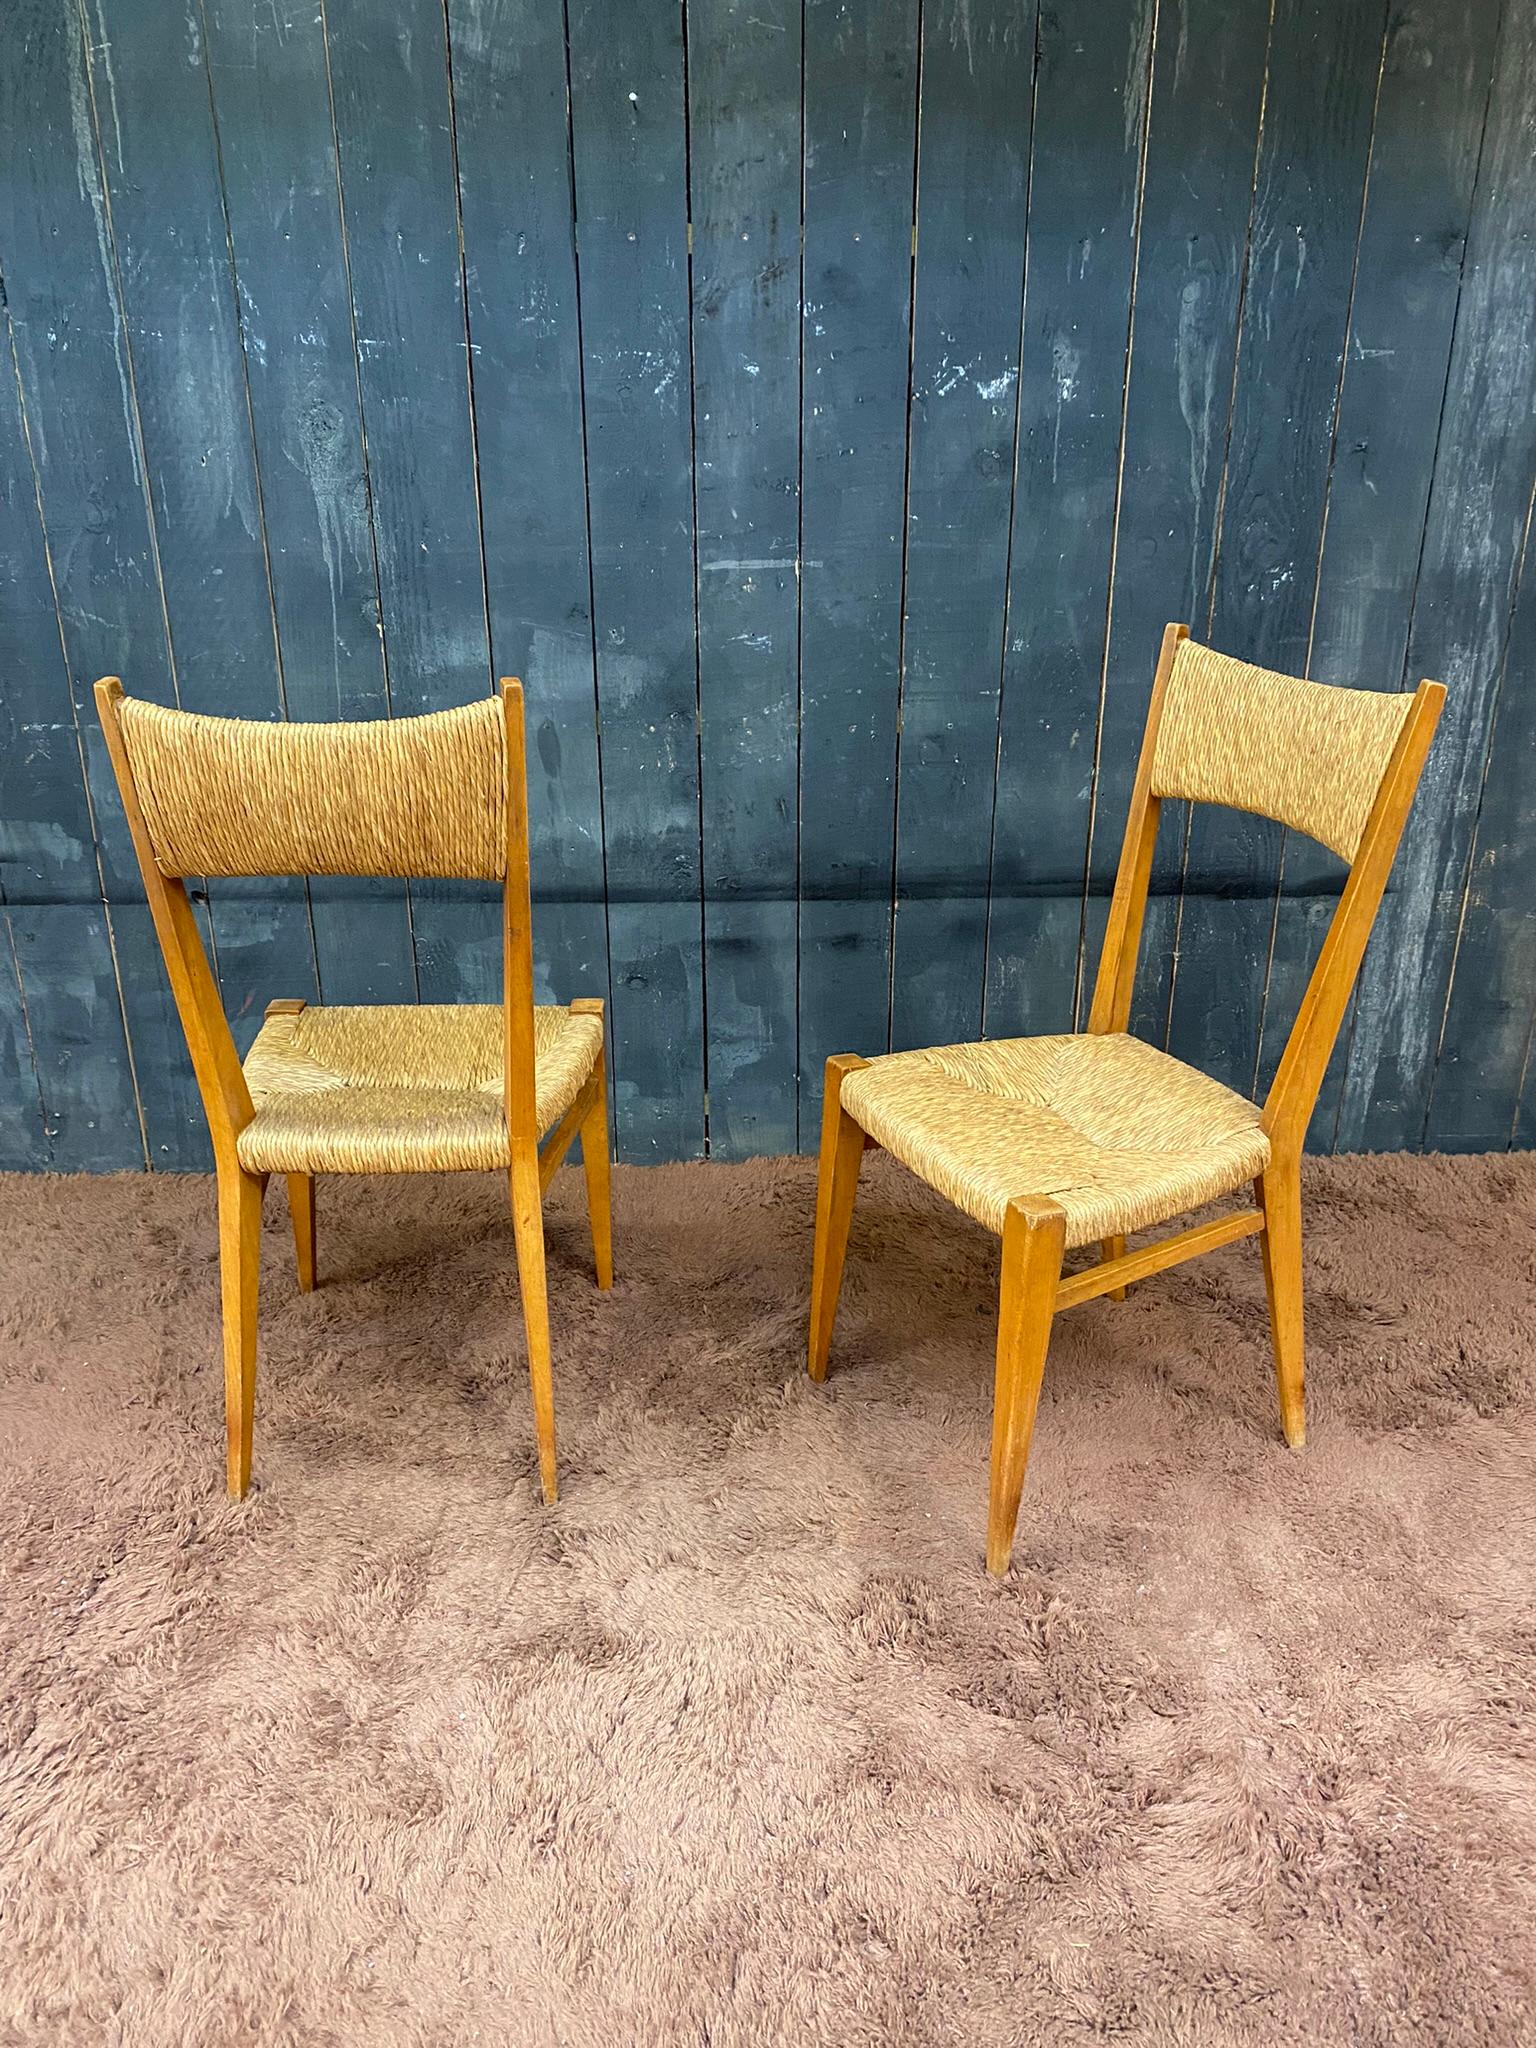 Series of 6 Elegant Oak Chairs, French Reconstruction Period, circa 1950 For Sale 9